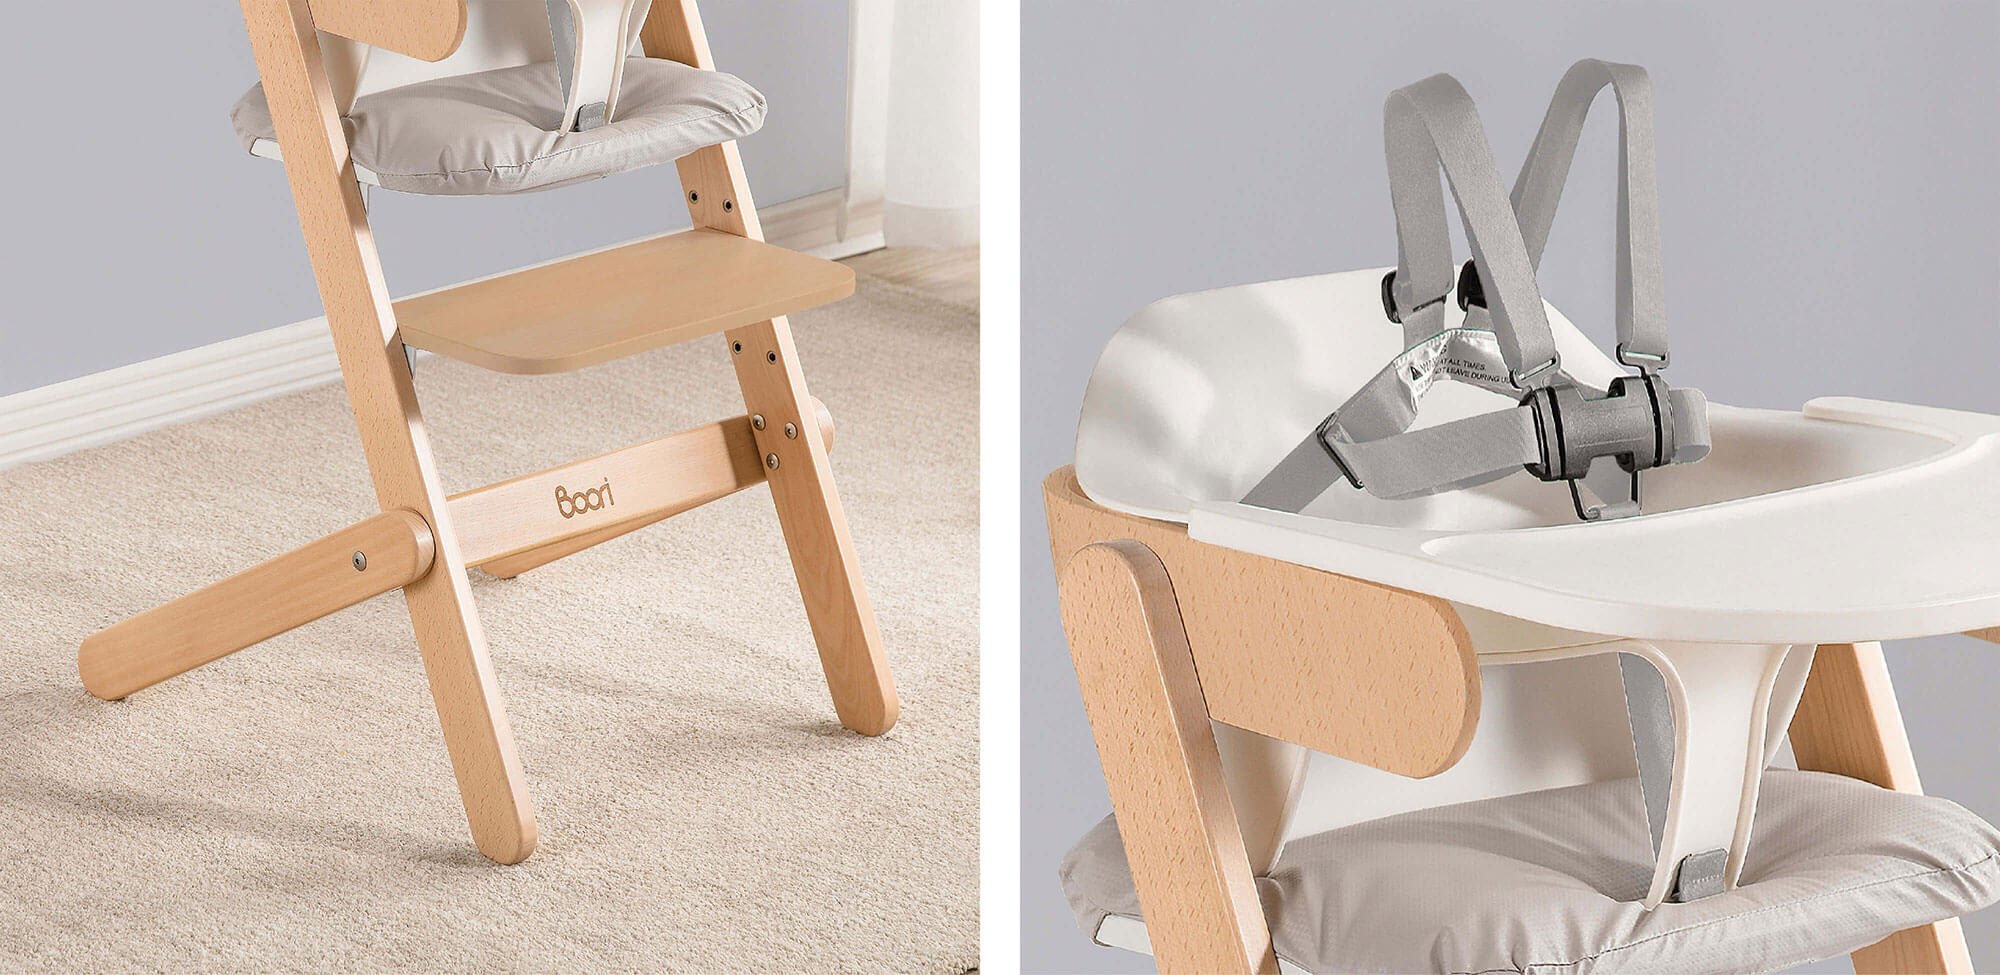 Highchair safety harness